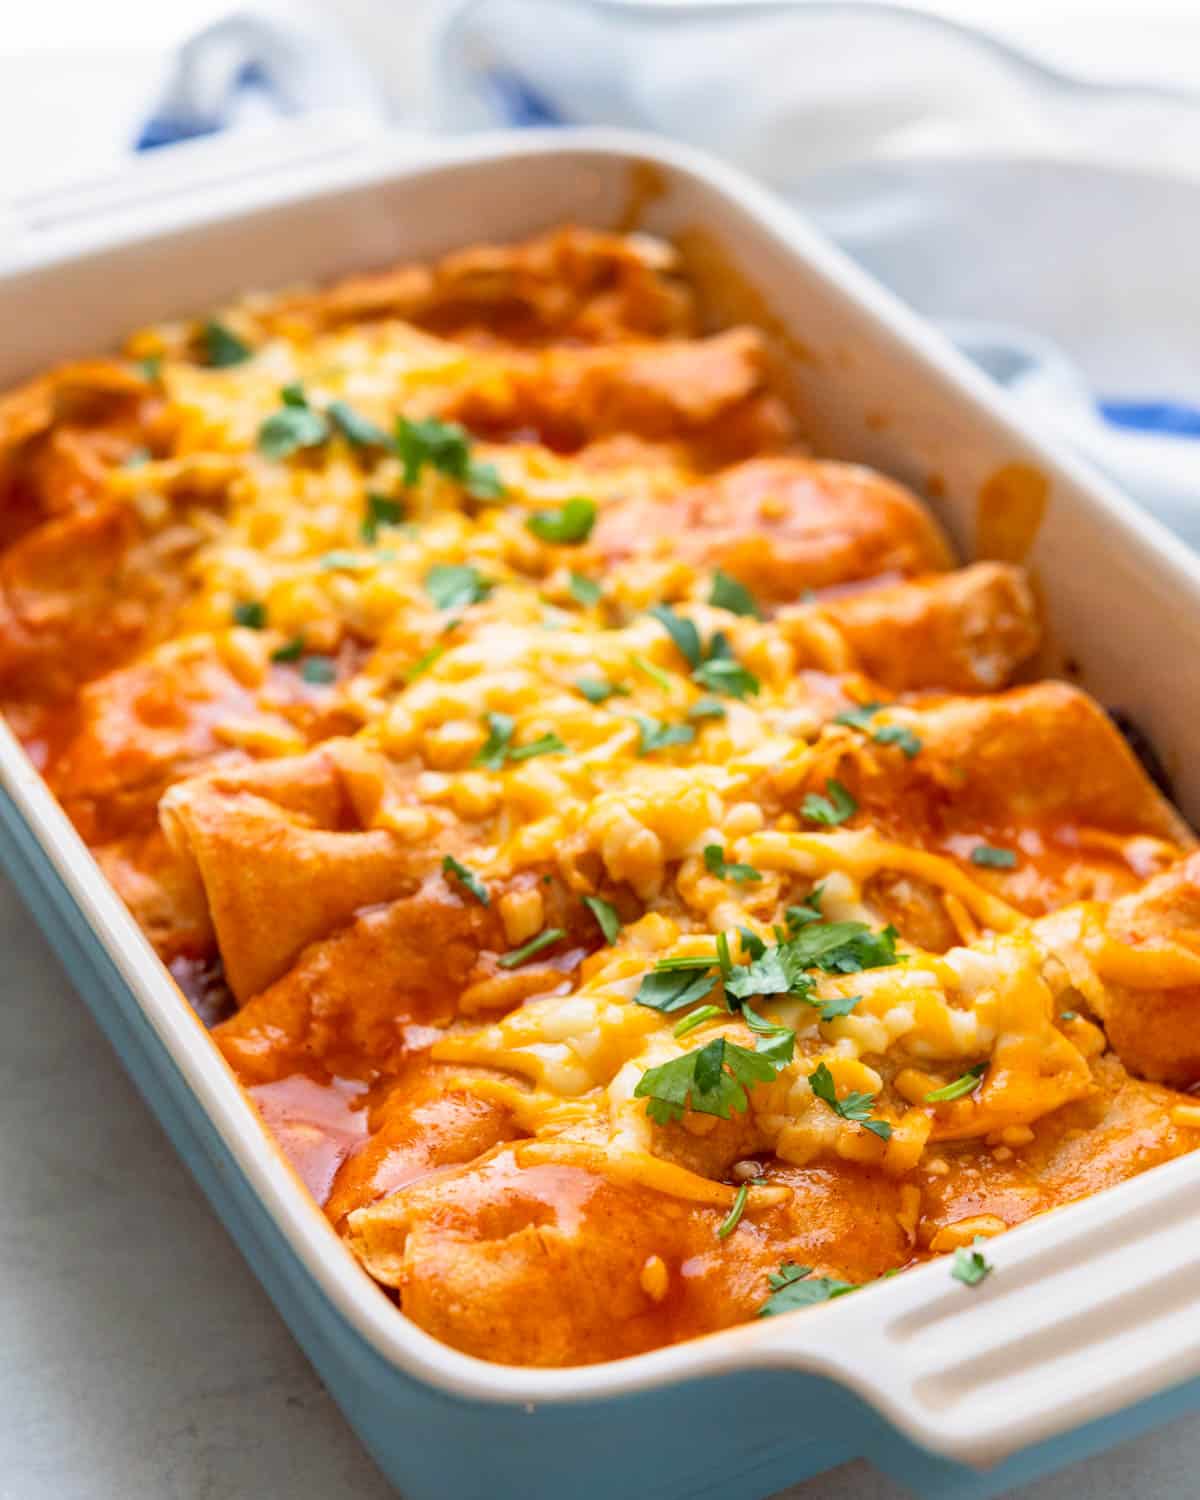 A casserole dish of beef enchiladas with cheese and cilantro.